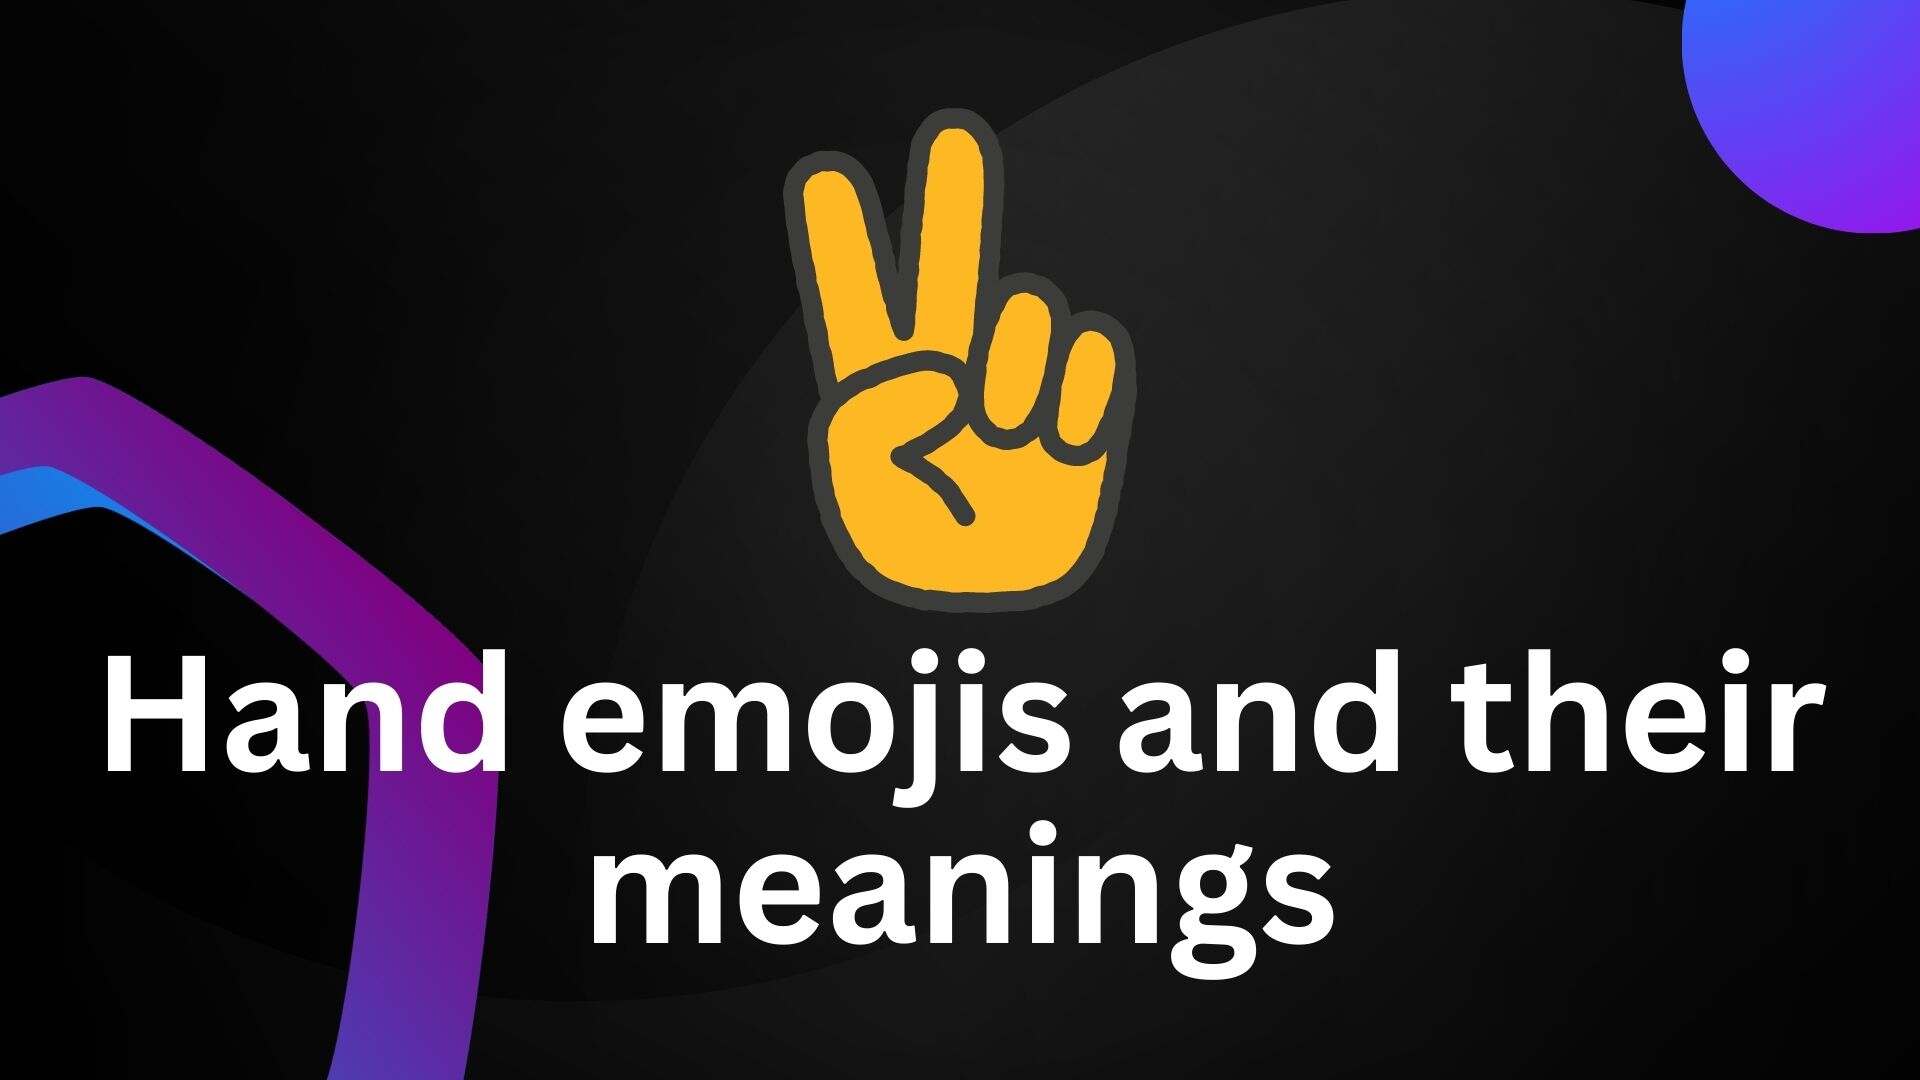 Hand emojis and their meanings